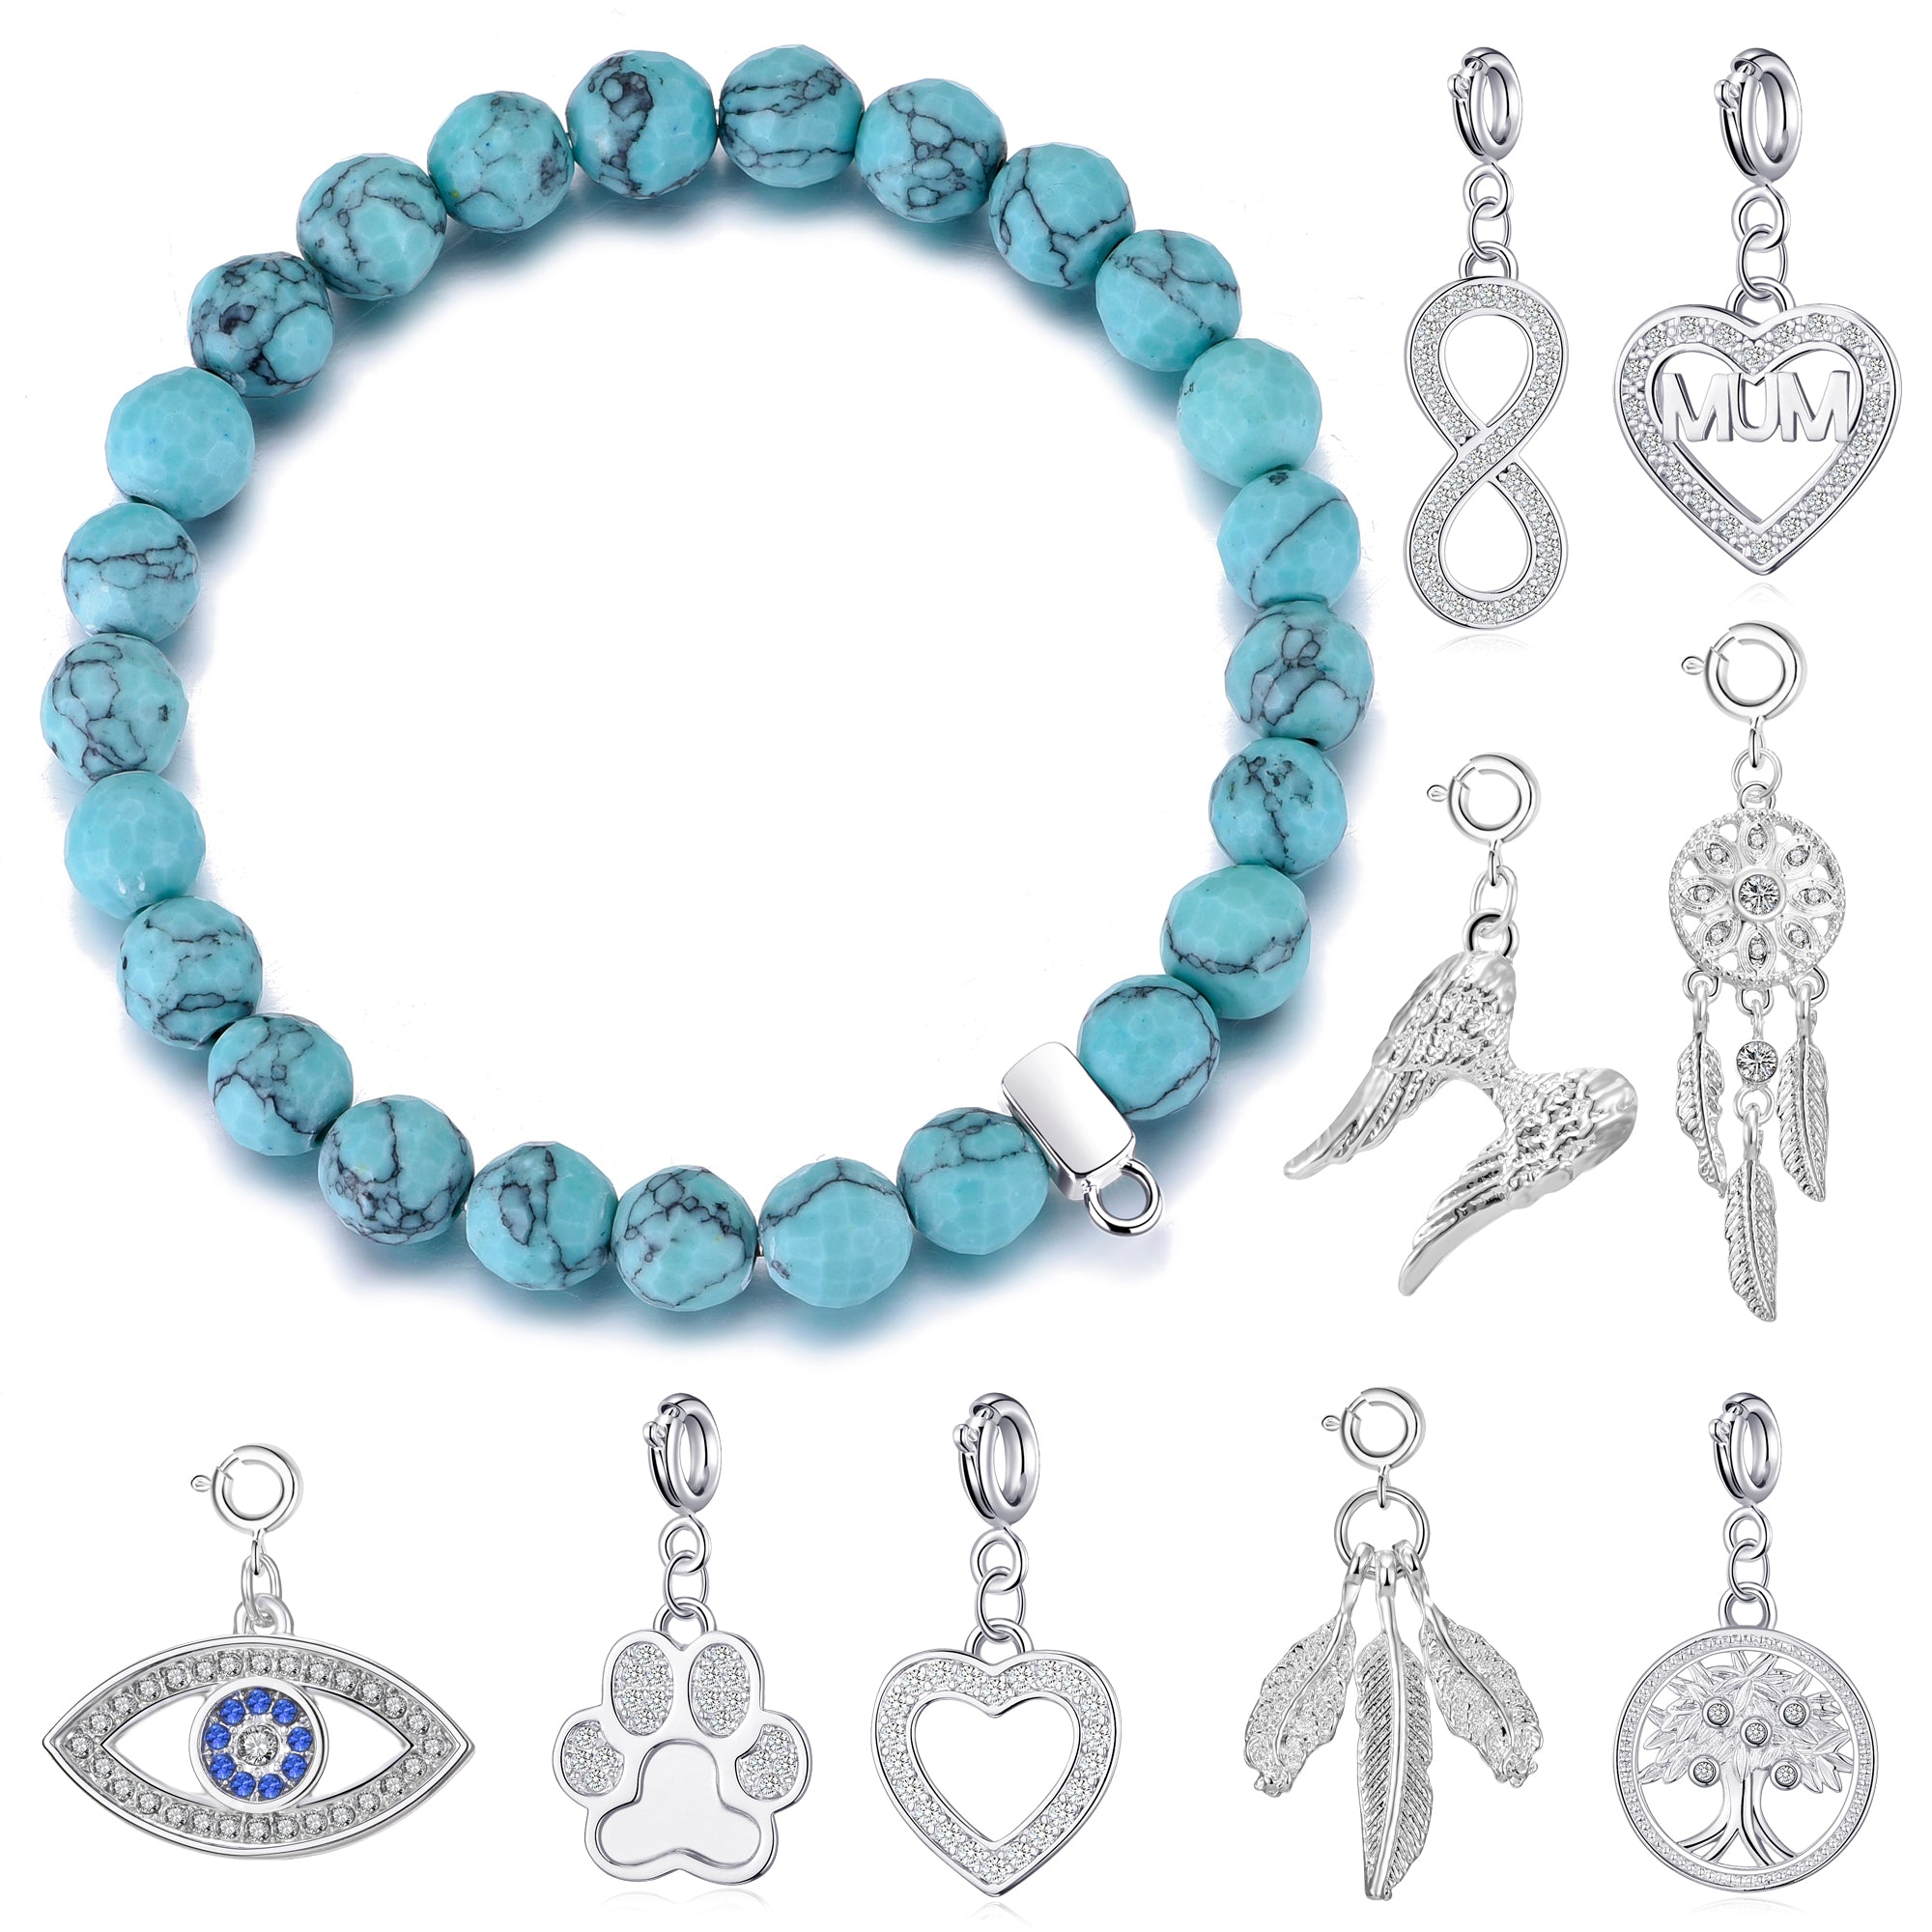 Faceted Synthetic Turquoise Gemstone Stretch Bracelet with Charm Created with Zircondia® Crystals by Philip Jones Jewellery